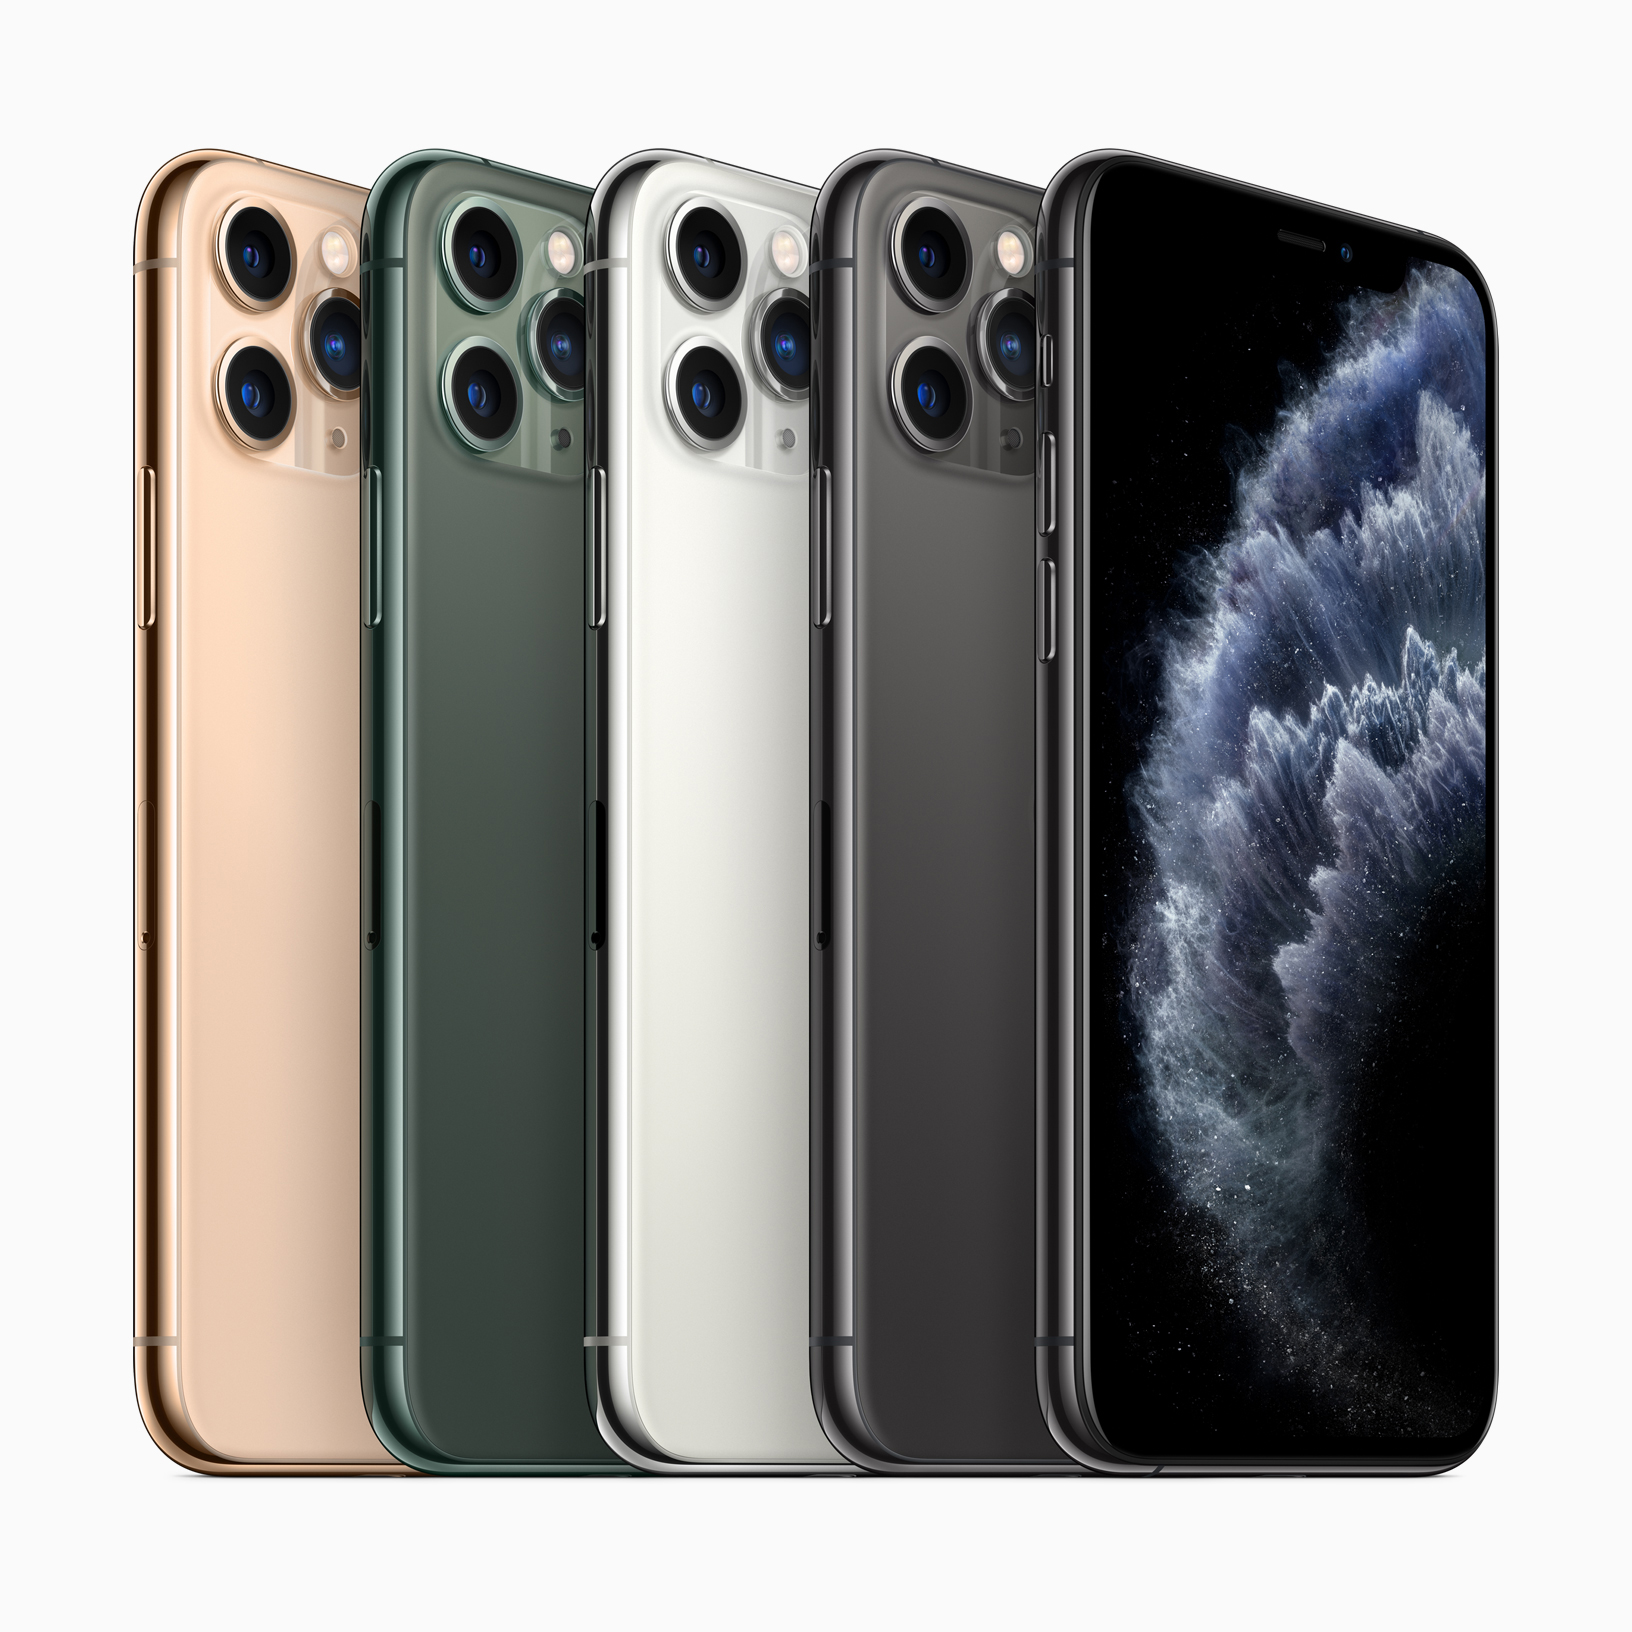 Everything to know about the new iPhone 11, iPhone 11 Pro, and Apple Watch Series 5